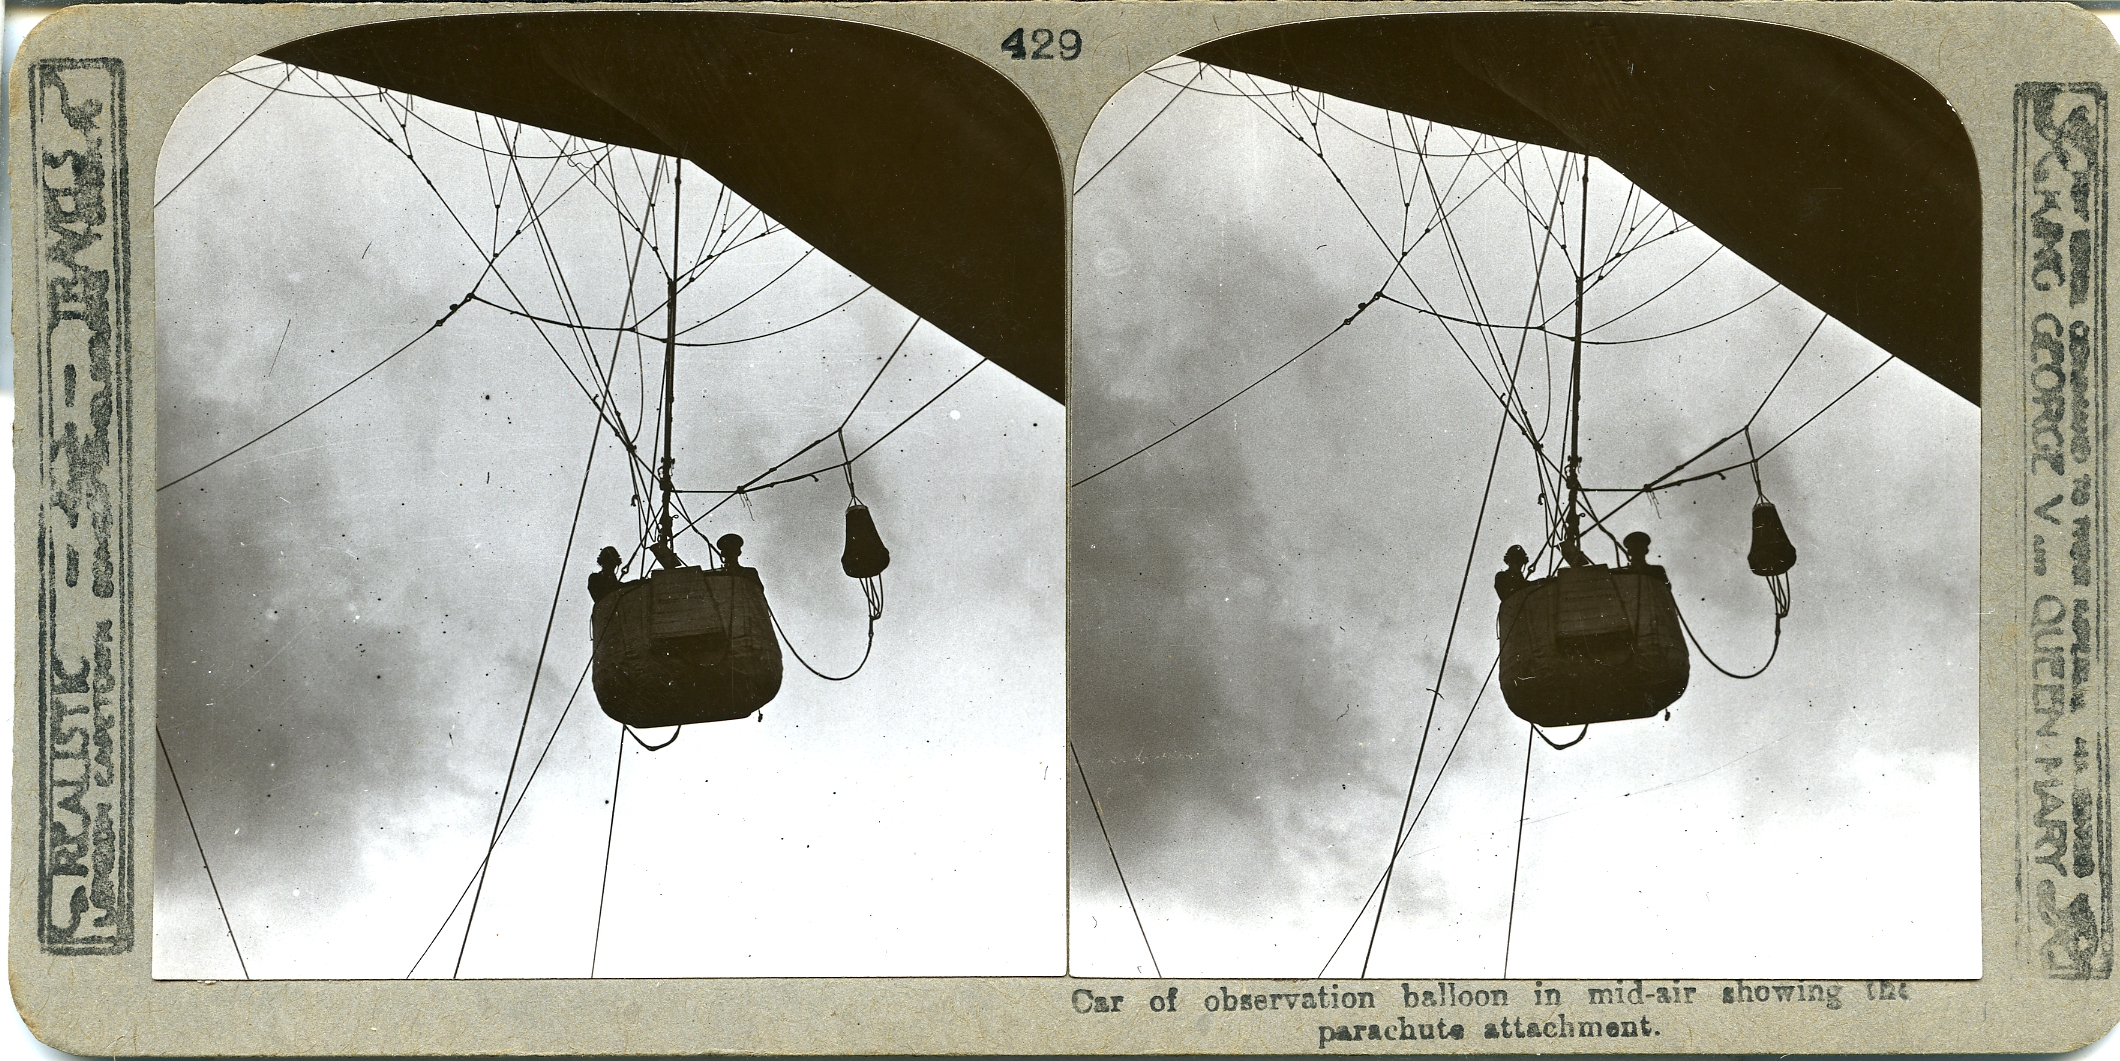 Car of observation balloon in mid-air showing the parachute attachment